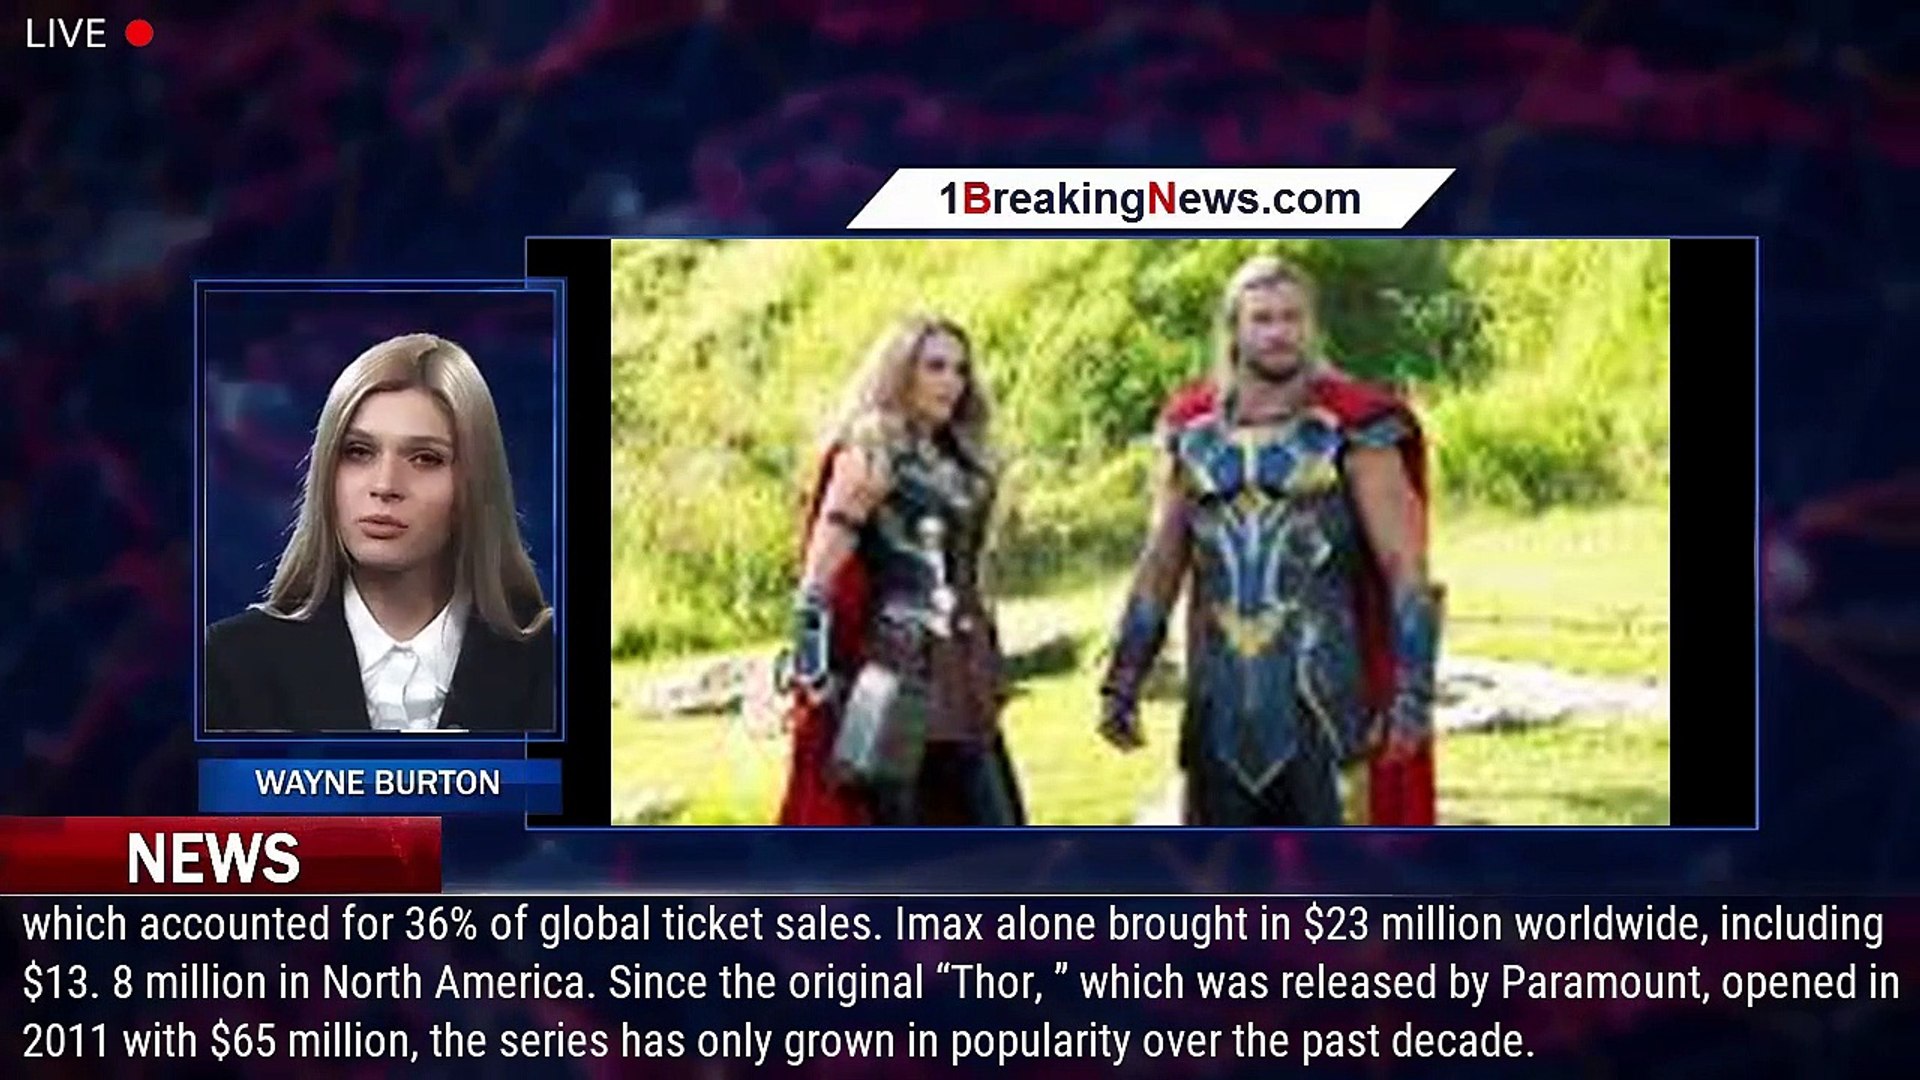 Thor: Love And Thunder Gives Box Office Positive Vibes With $143 Million  Debut - LRM